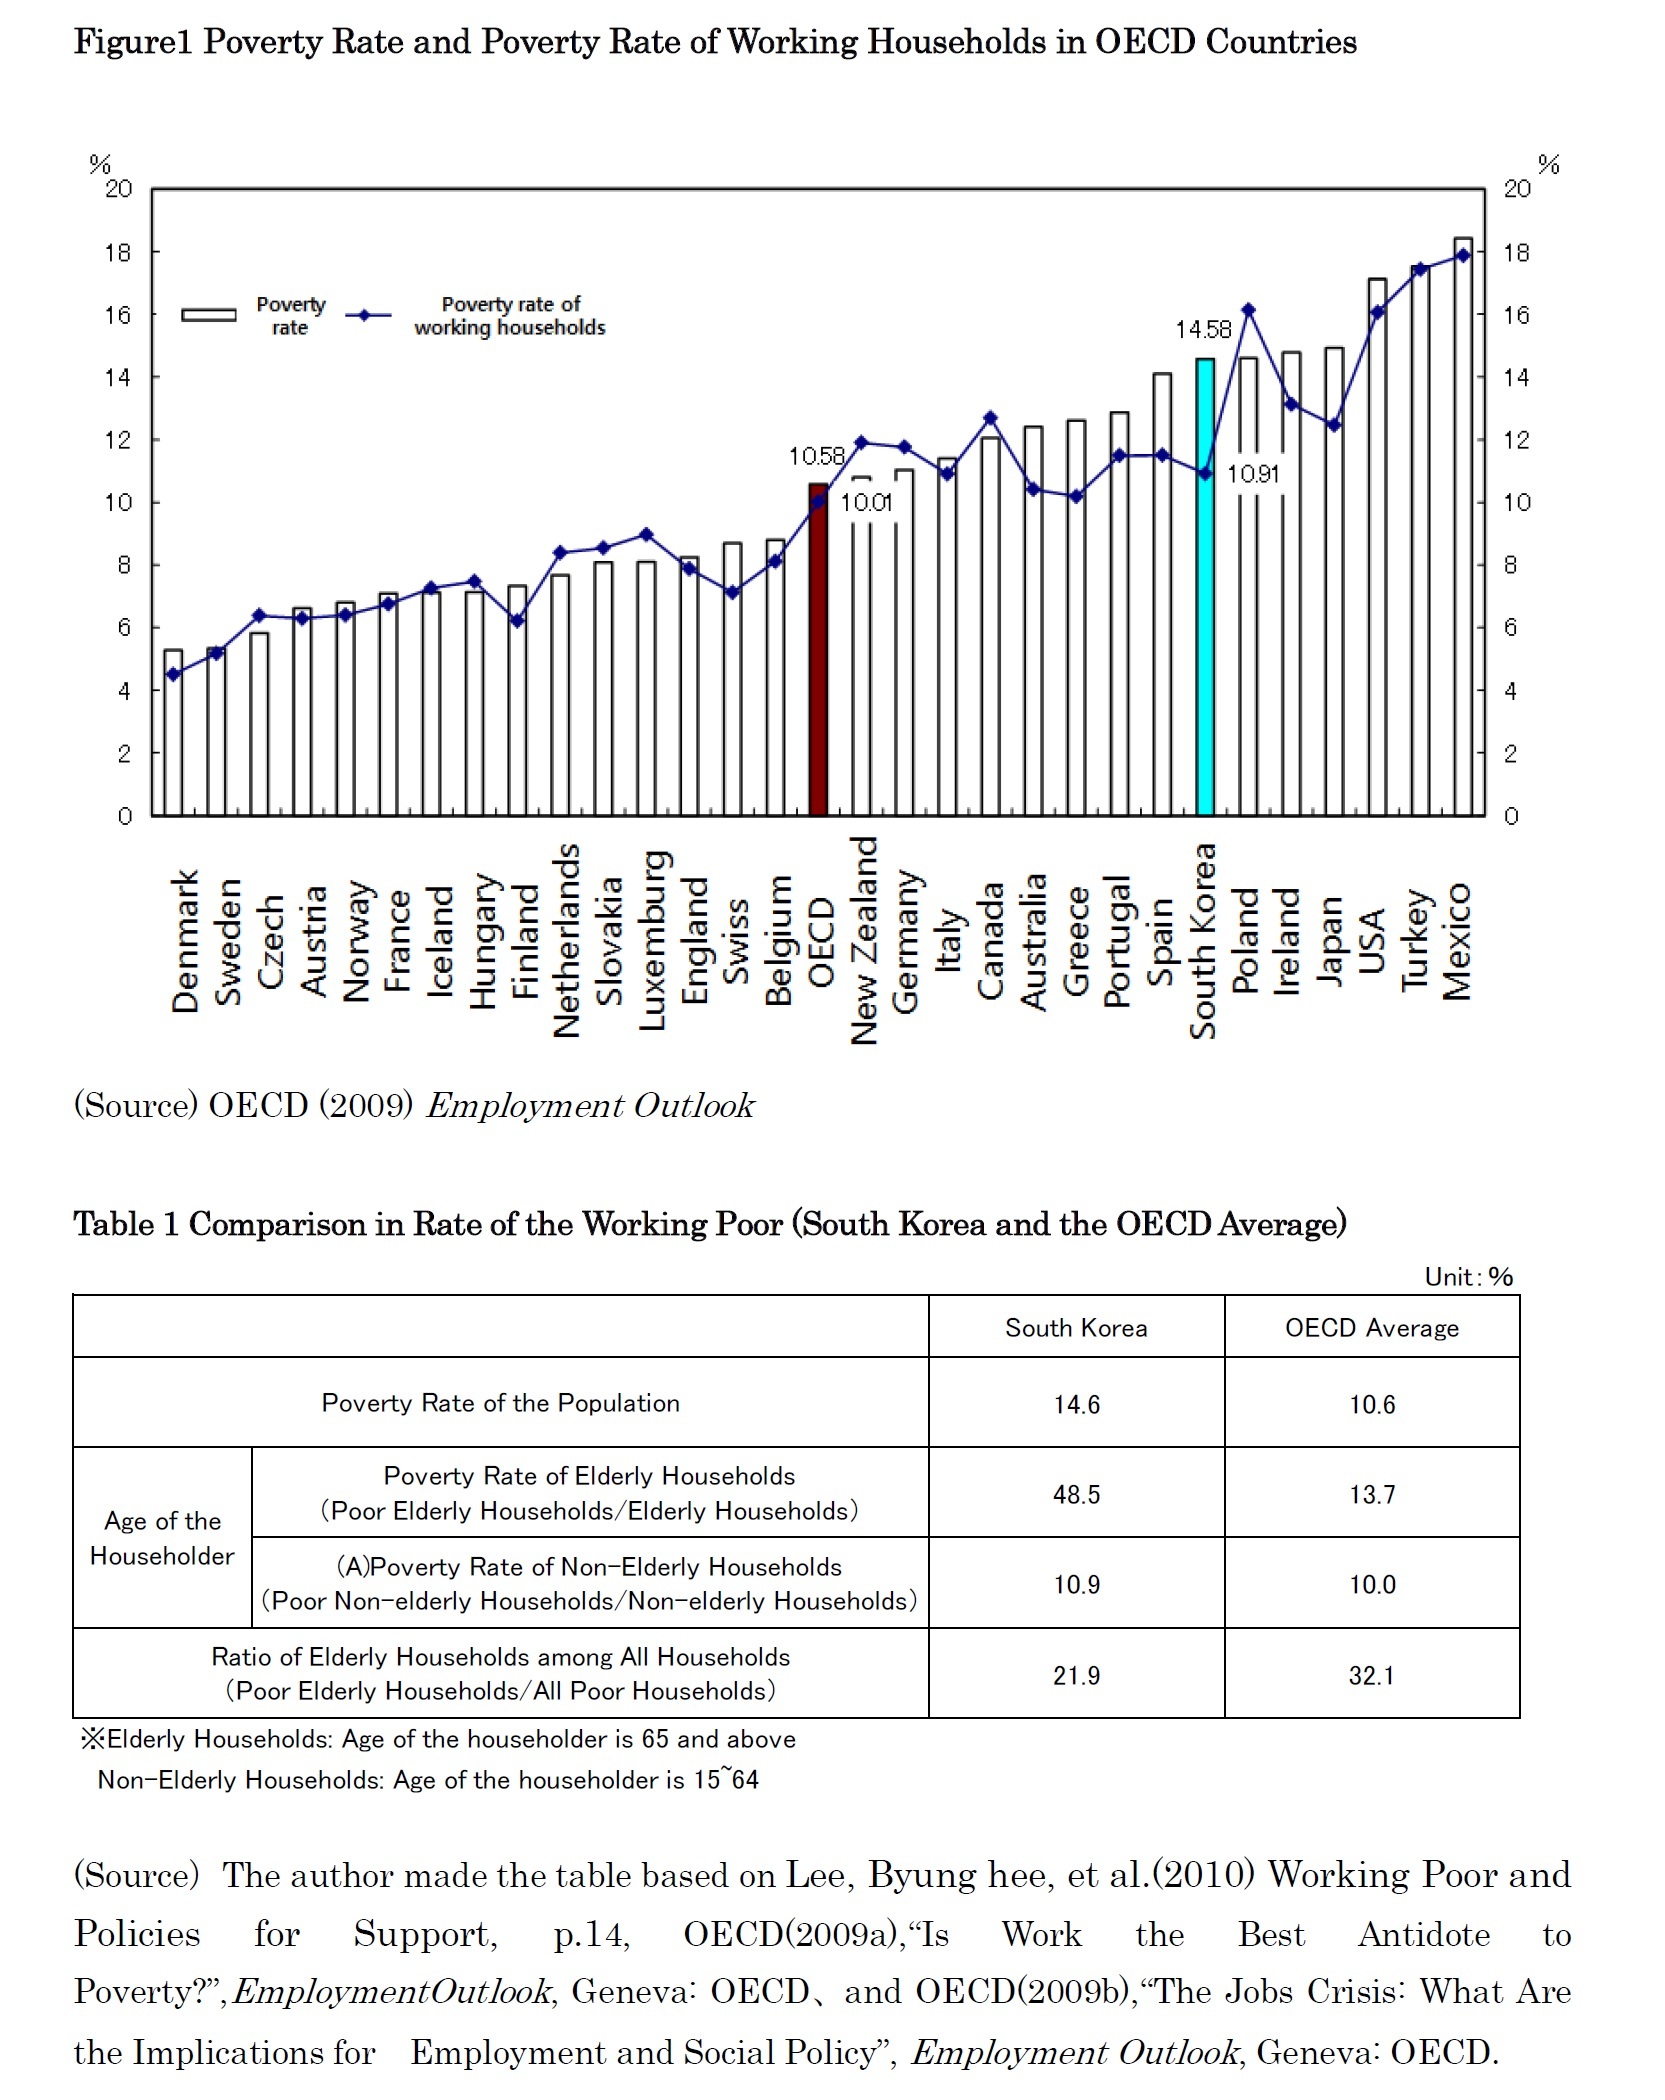 Figure1 Poverty Rate and Poverty Rate of Working Households in OECD Countries/Table 1 Comparison in Rate of the Working Poor (South Korea and the OECD Average)